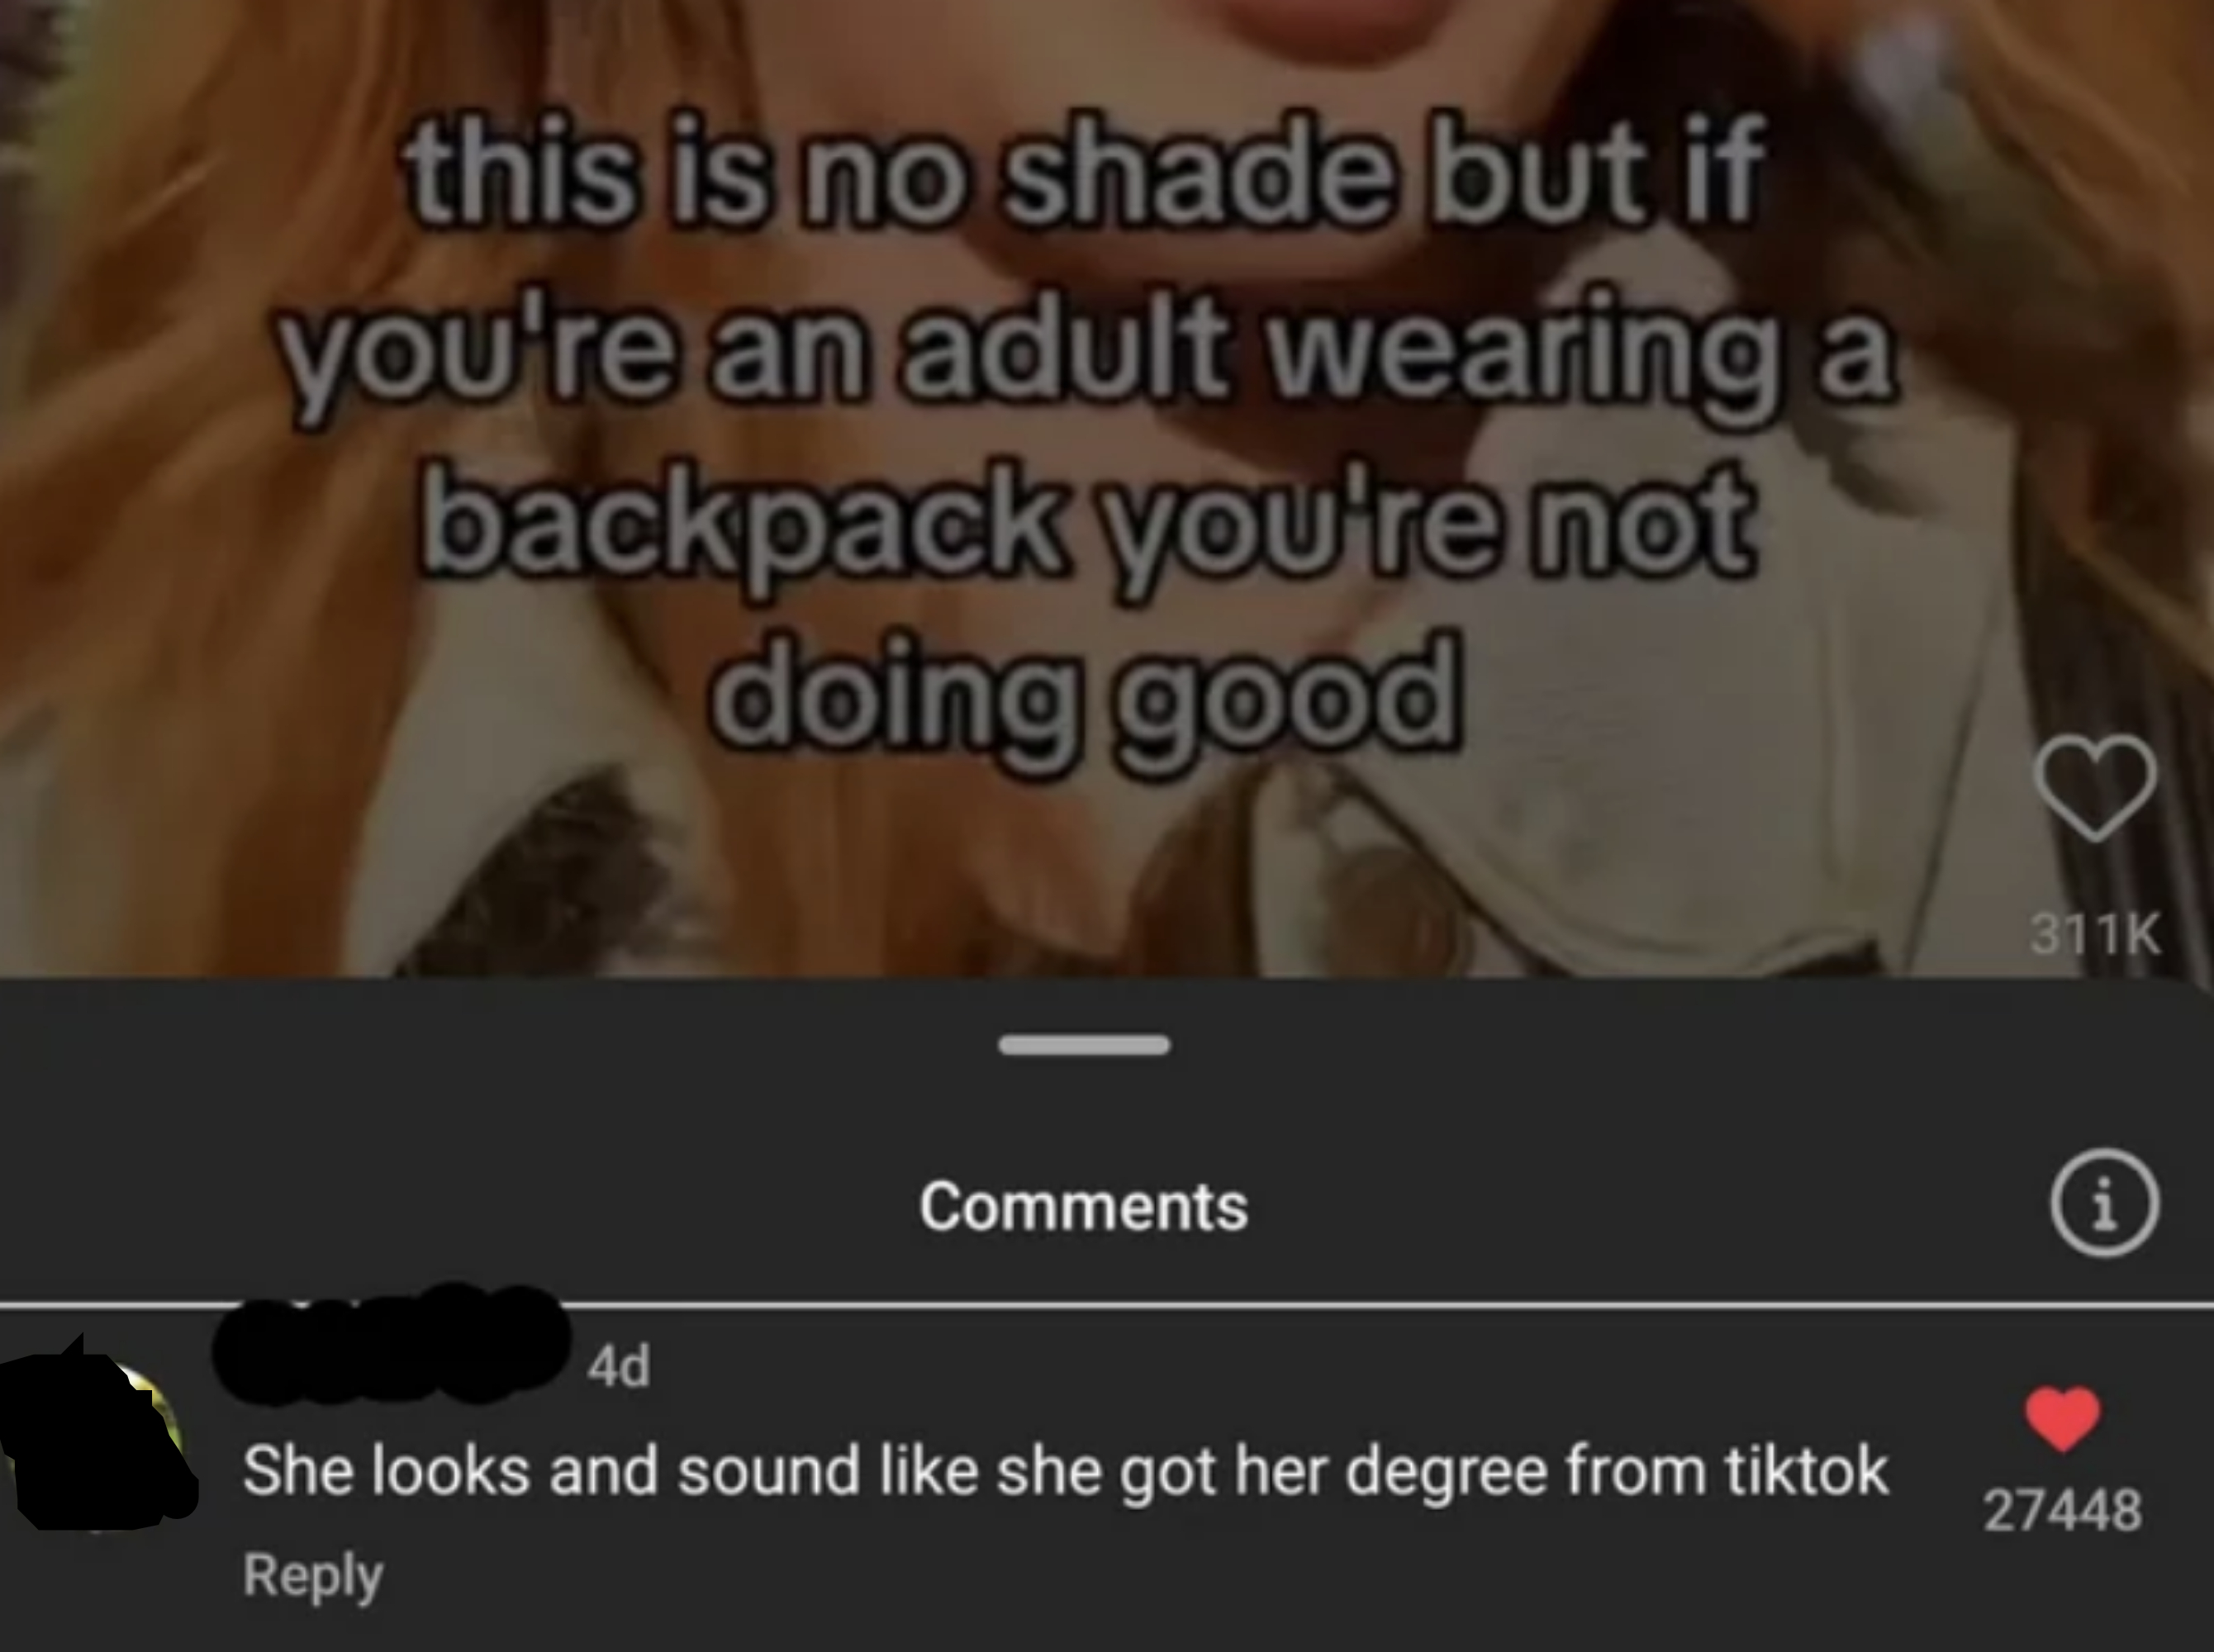 &quot;She looks and sound like she got her degree from tiktok&quot;